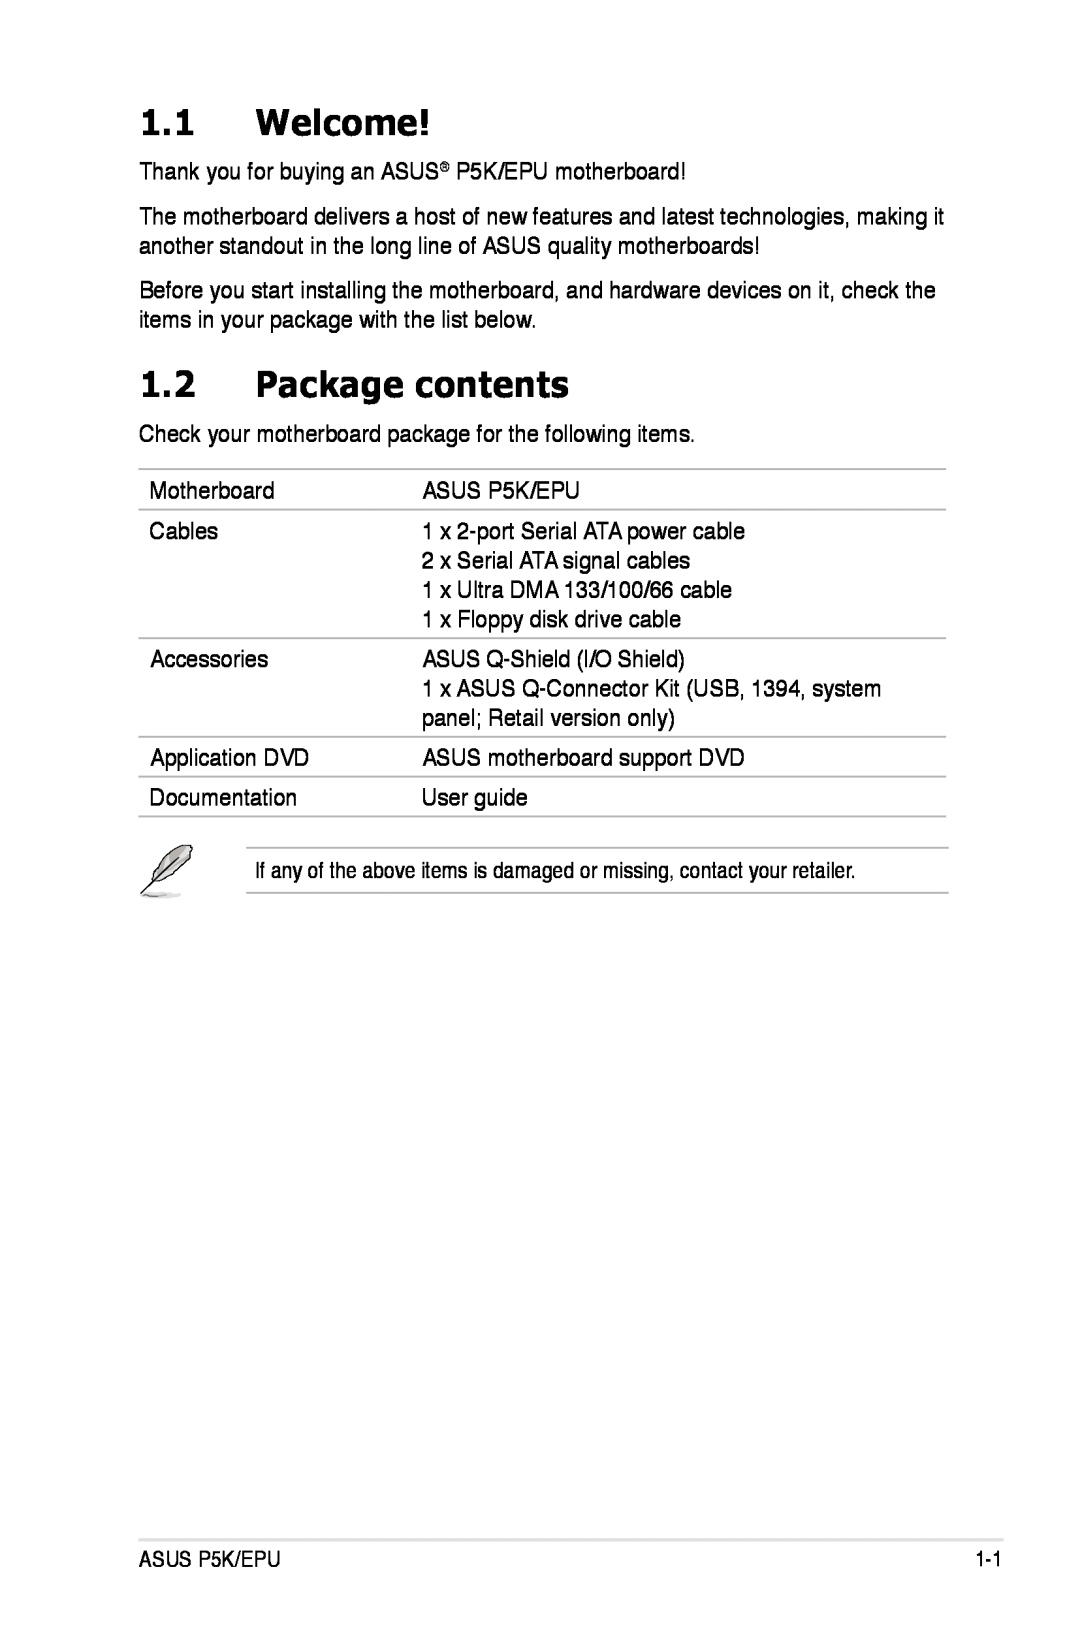 Asus P5K/EPU manual Welcome, Package contents 